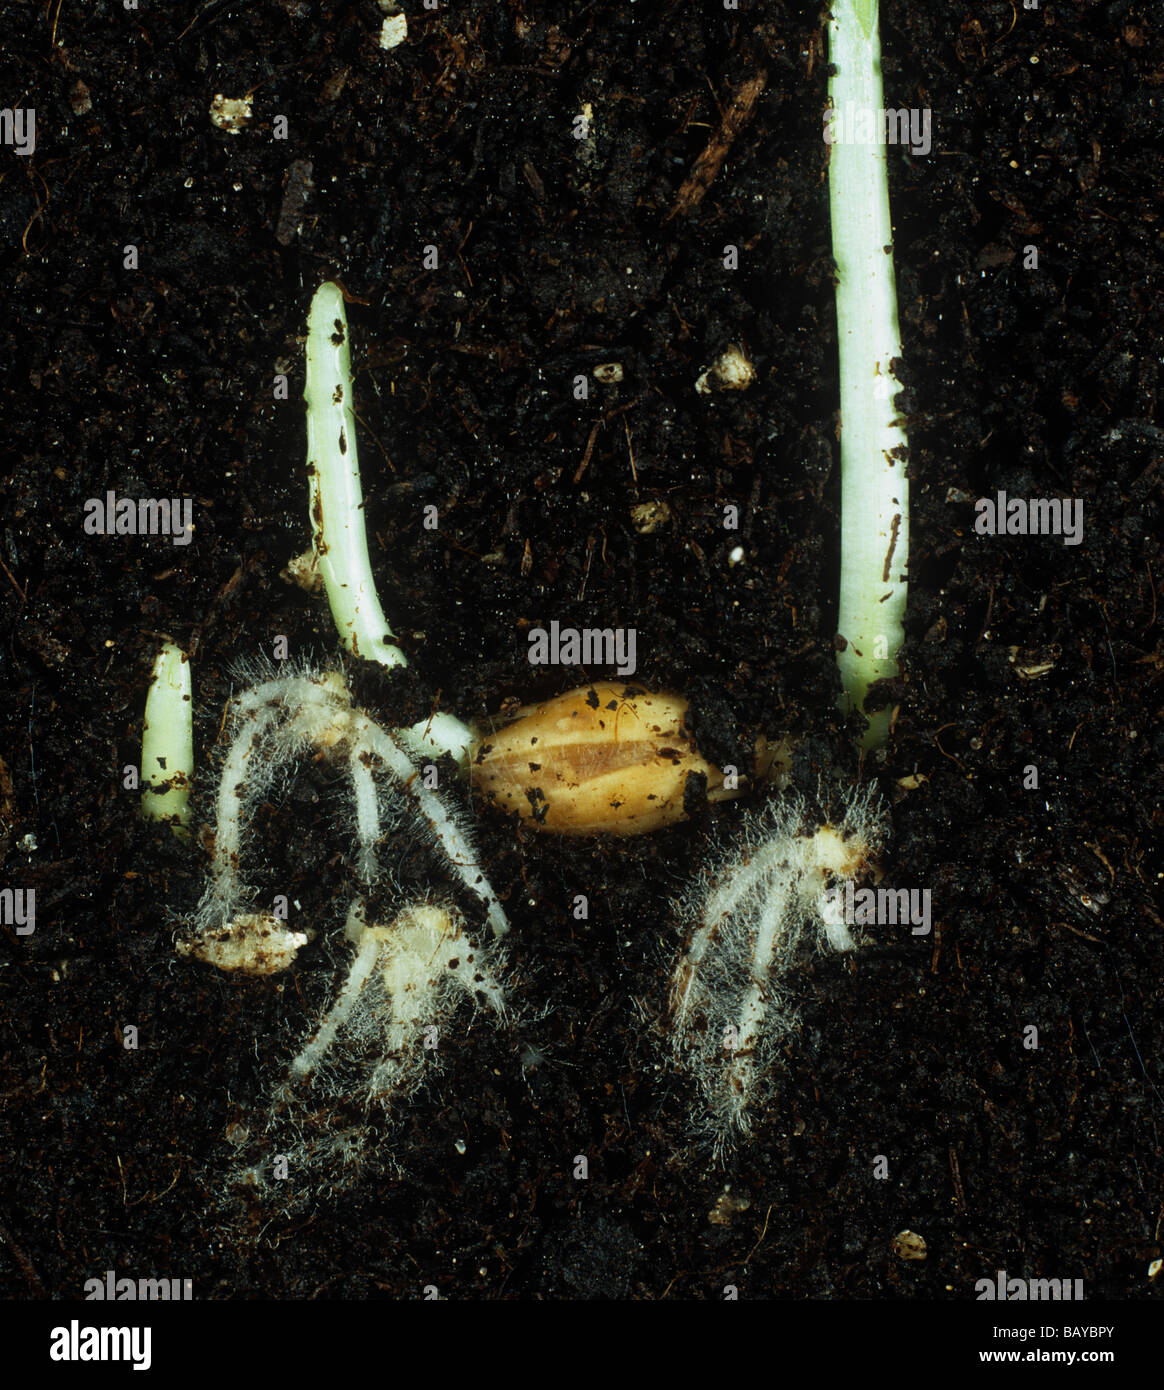 Germinating barley seeds seen in a glass sided tank Stock Photo